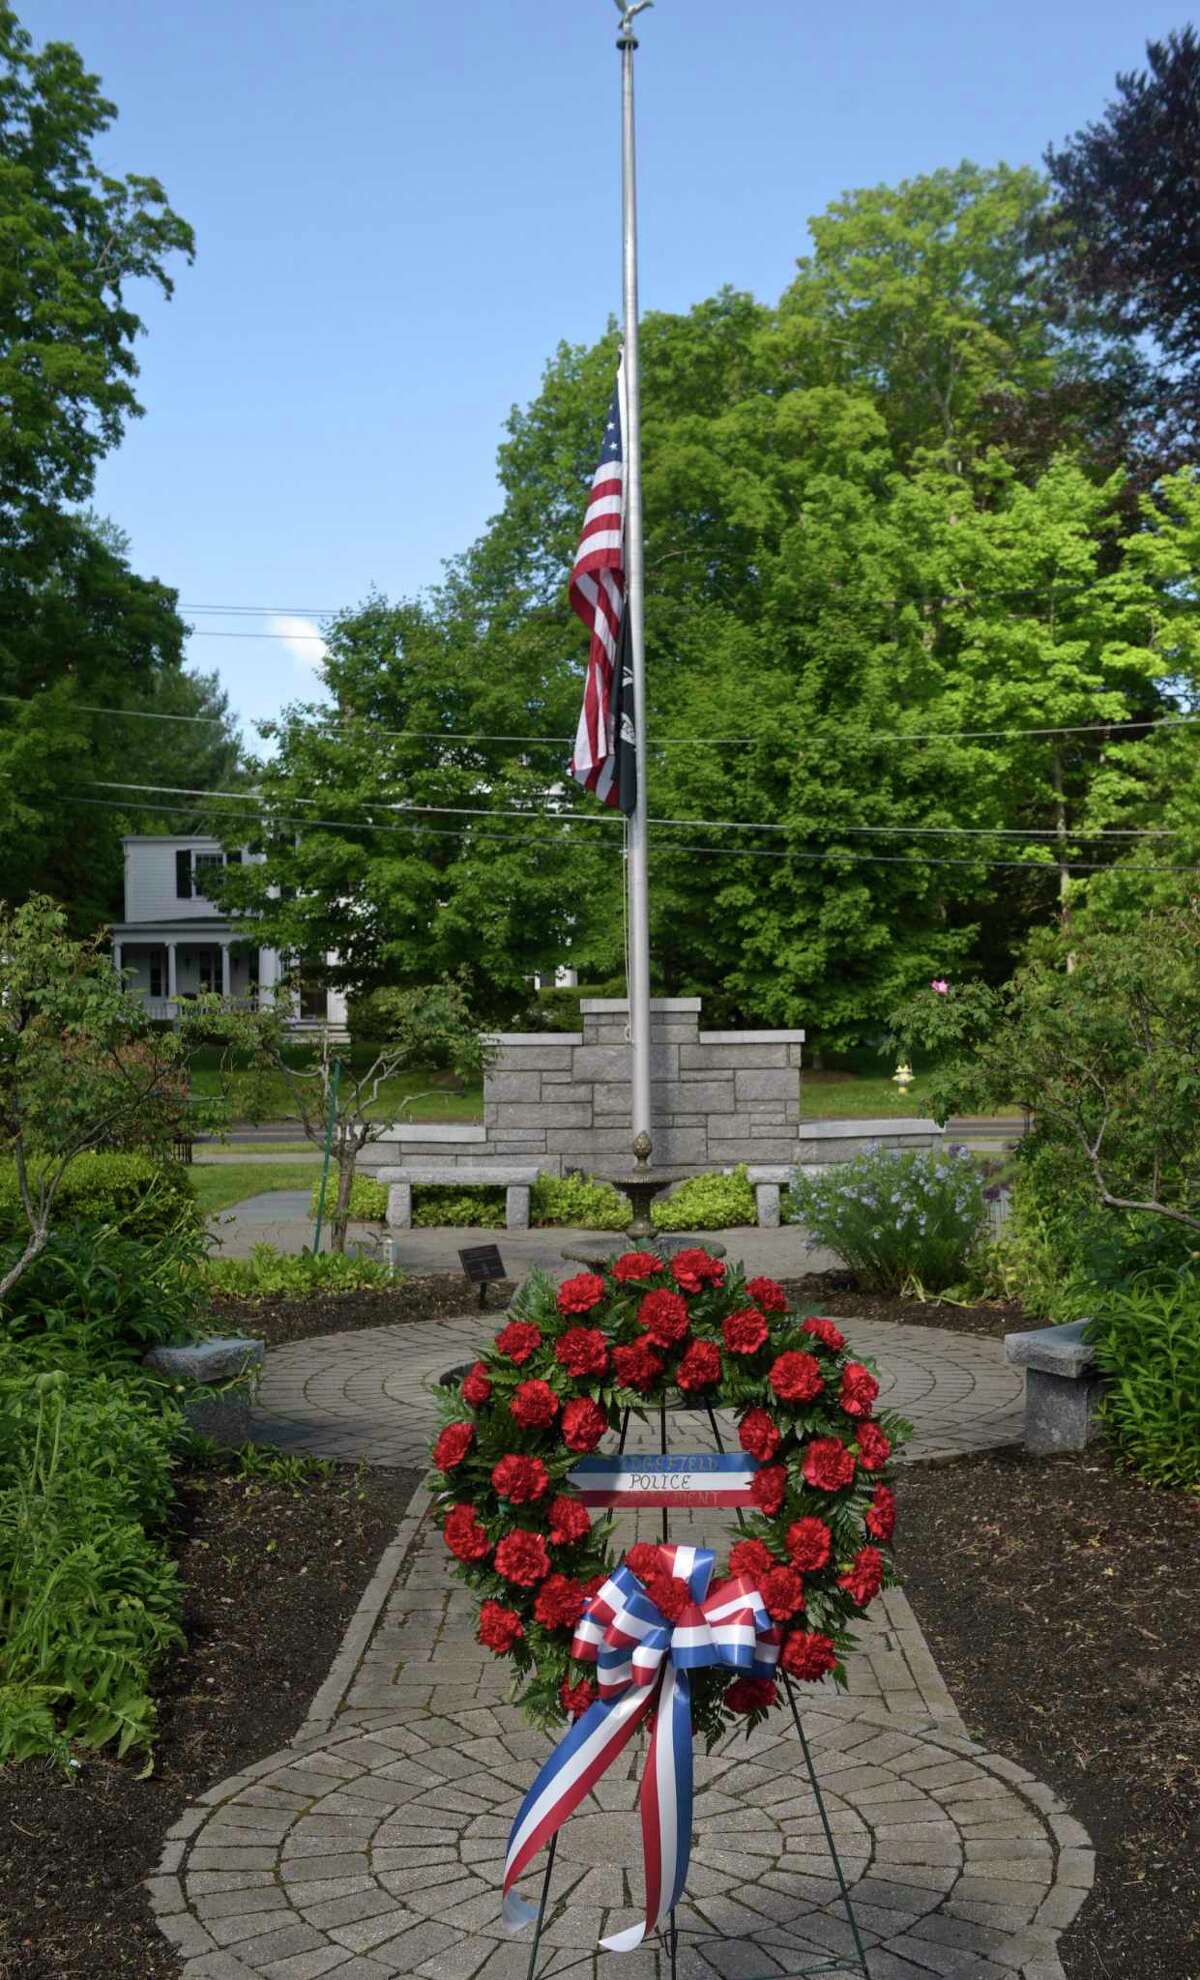 The Ridgefield Police Department held their annual Memorial Ceremony to honor and pay tribute to deceased members of the department. At the Lounsbury House, in Ridgefield, Conn, Thursday, May 27, 2021.